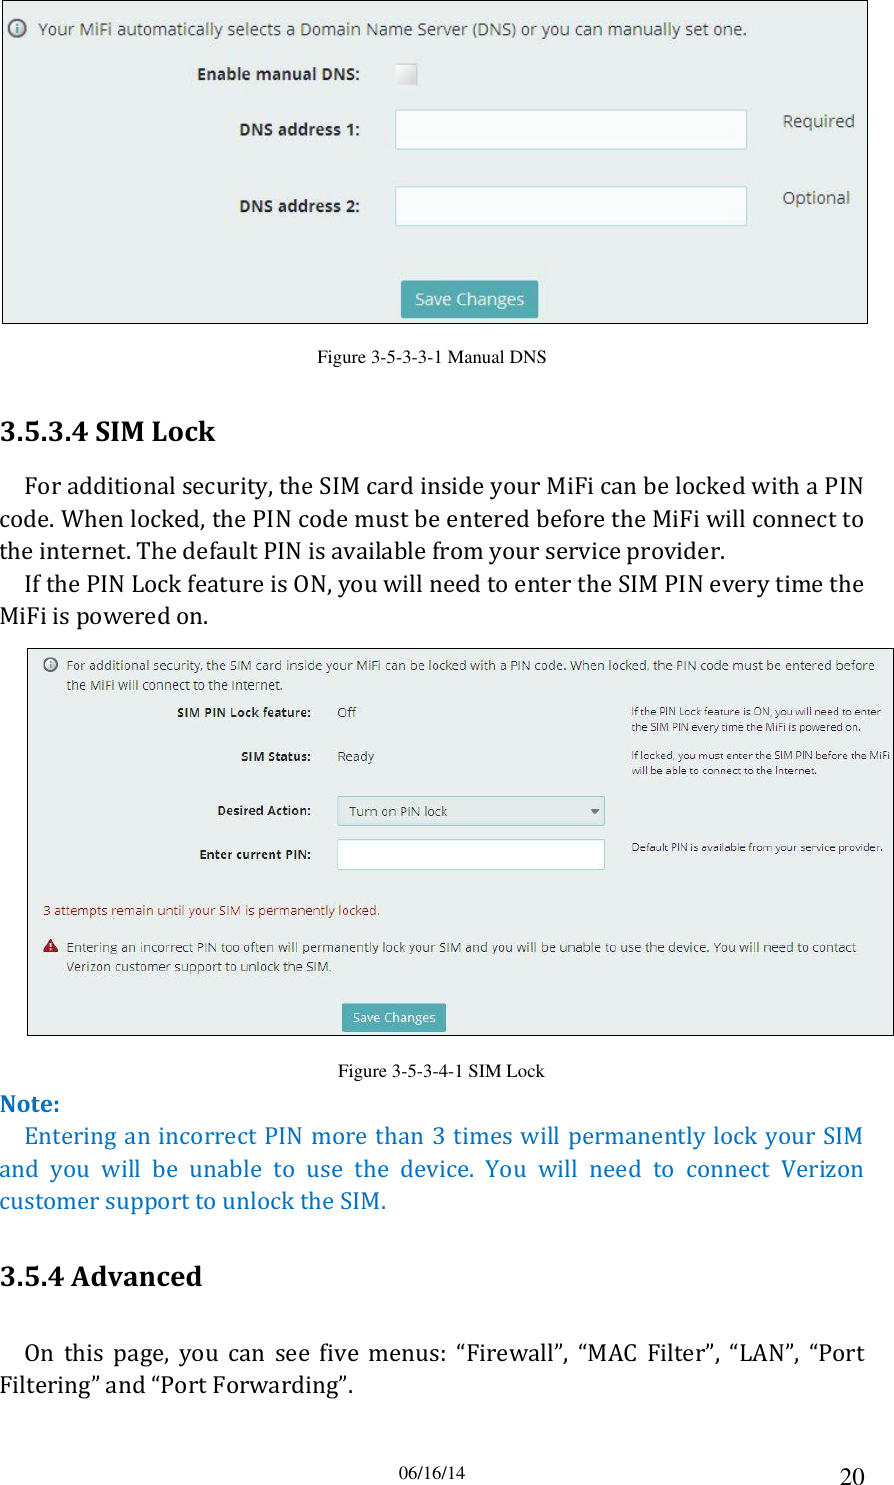 06/16/14 20  Figure 3-5-3-3-1 Manual DNS 3.5.3.4 SIM Lock For additional security, the SIM card inside your MiFi can be locked with a PIN code. When locked, the PIN code must be entered before the MiFi will connect to the internet. The default PIN is available from your service provider. If the PIN Lock feature is ON, you will need to enter the SIM PIN every time the MiFi is powered on.  Figure 3-5-3-4-1 SIM Lock Note: Entering an incorrect PIN more than 3 times will permanently lock your SIM and  you  will  be  unable  to  use  the  device.  You  will  need  to  connect  Verizon customer support to unlock the SIM. 3.5.4 Advanced On  this  page,  you  can  see  five  menus:  “Firewall”,  “MAC  Filter”,  “LAN”,  “Port Filtering” and “Port Forwarding”. 